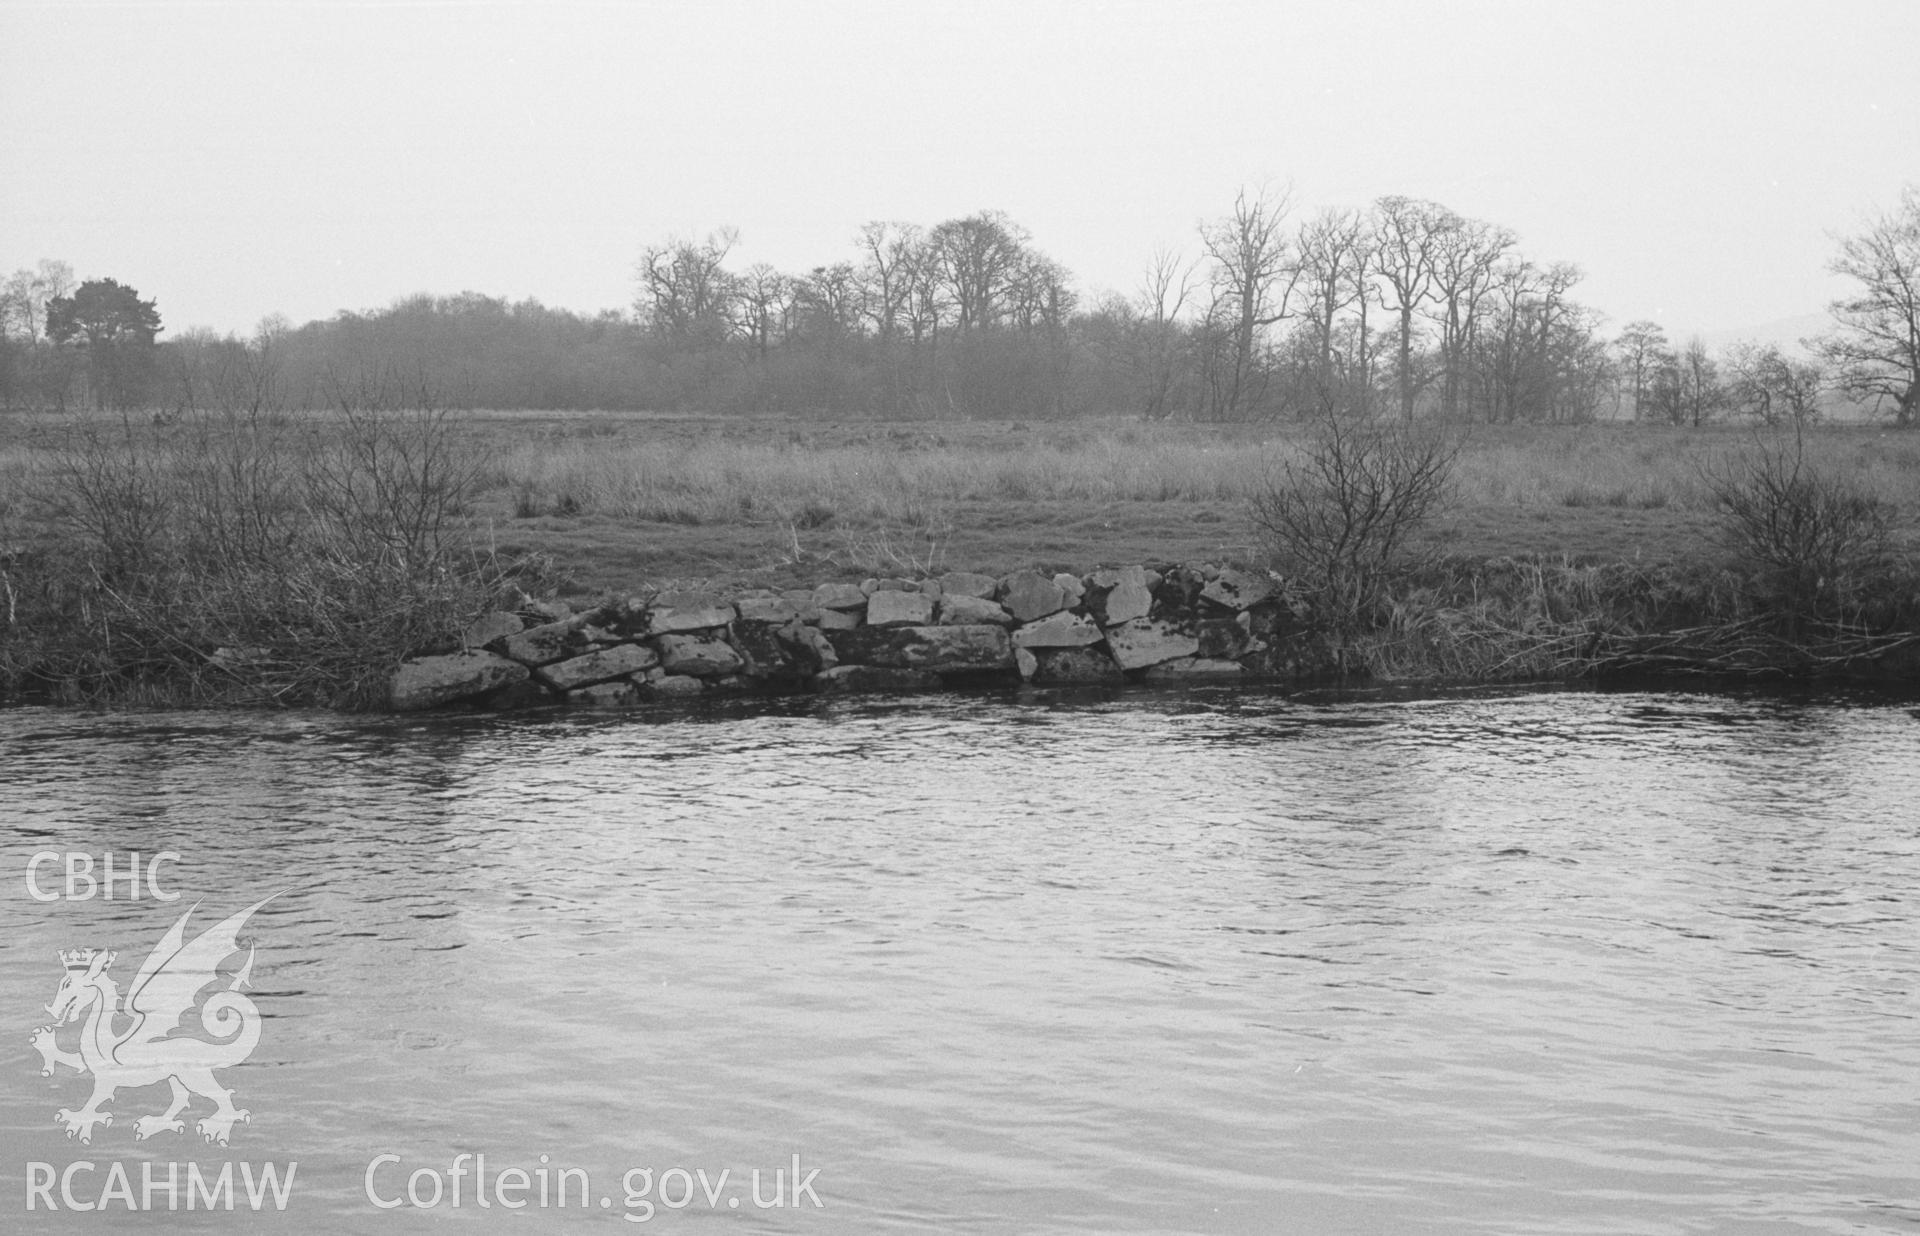 Digital copy of black & white negative showing view looking across the Teifi to the Highmead heronry in Moat Wood. Stones forming breakwater in river bank. Photographed by Arthur O. Chater in April 1966 from Grid Reference SN 506 427, looking north east.